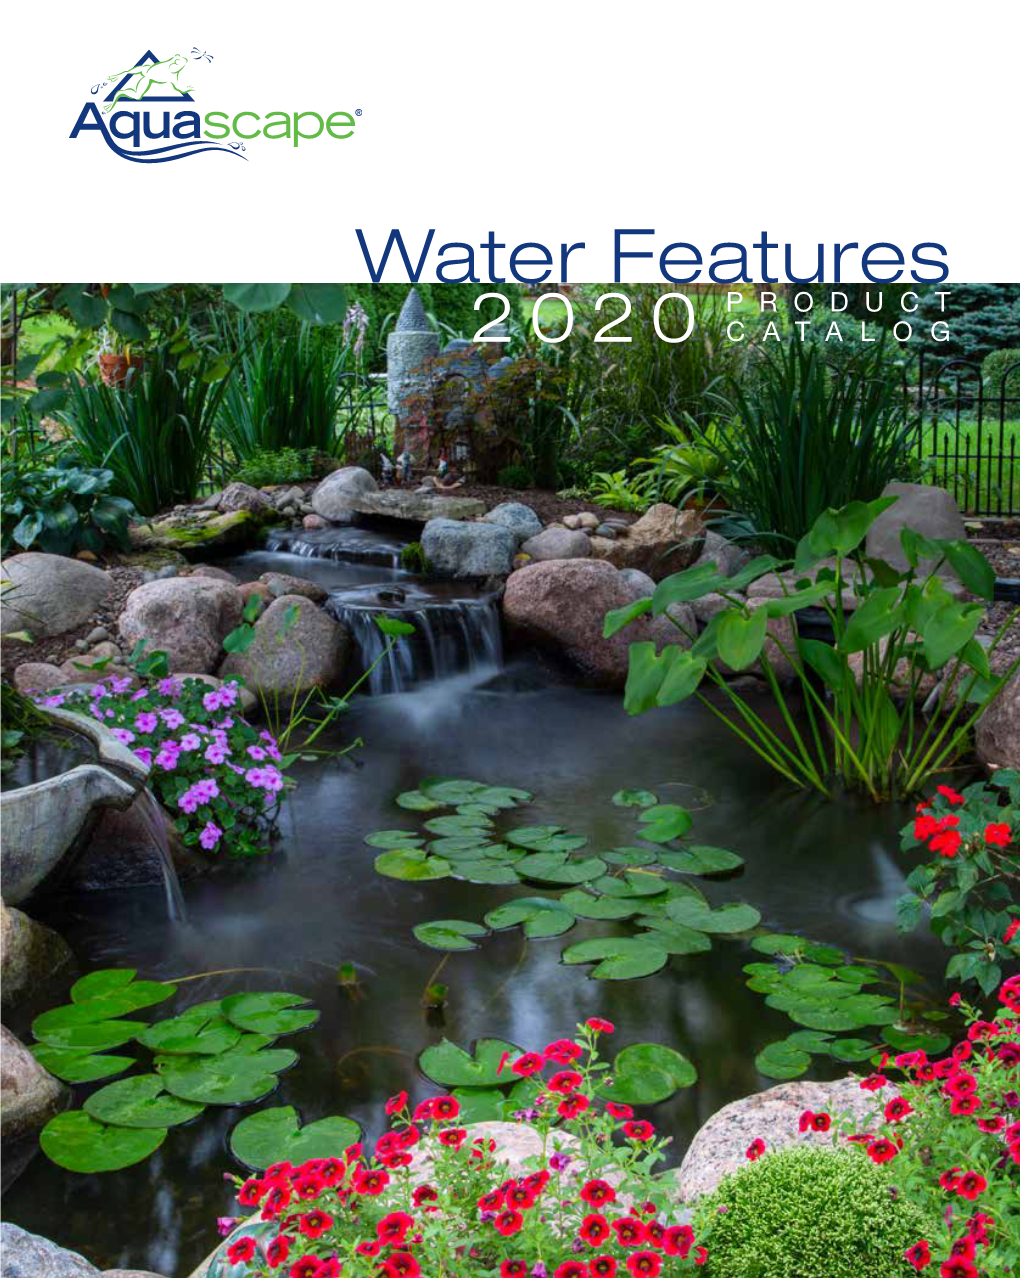 Water Features PRODUCT 2020 CATALOG the Leading Water Feature Manufacturer in North America Thank You for 29 Years of Support!